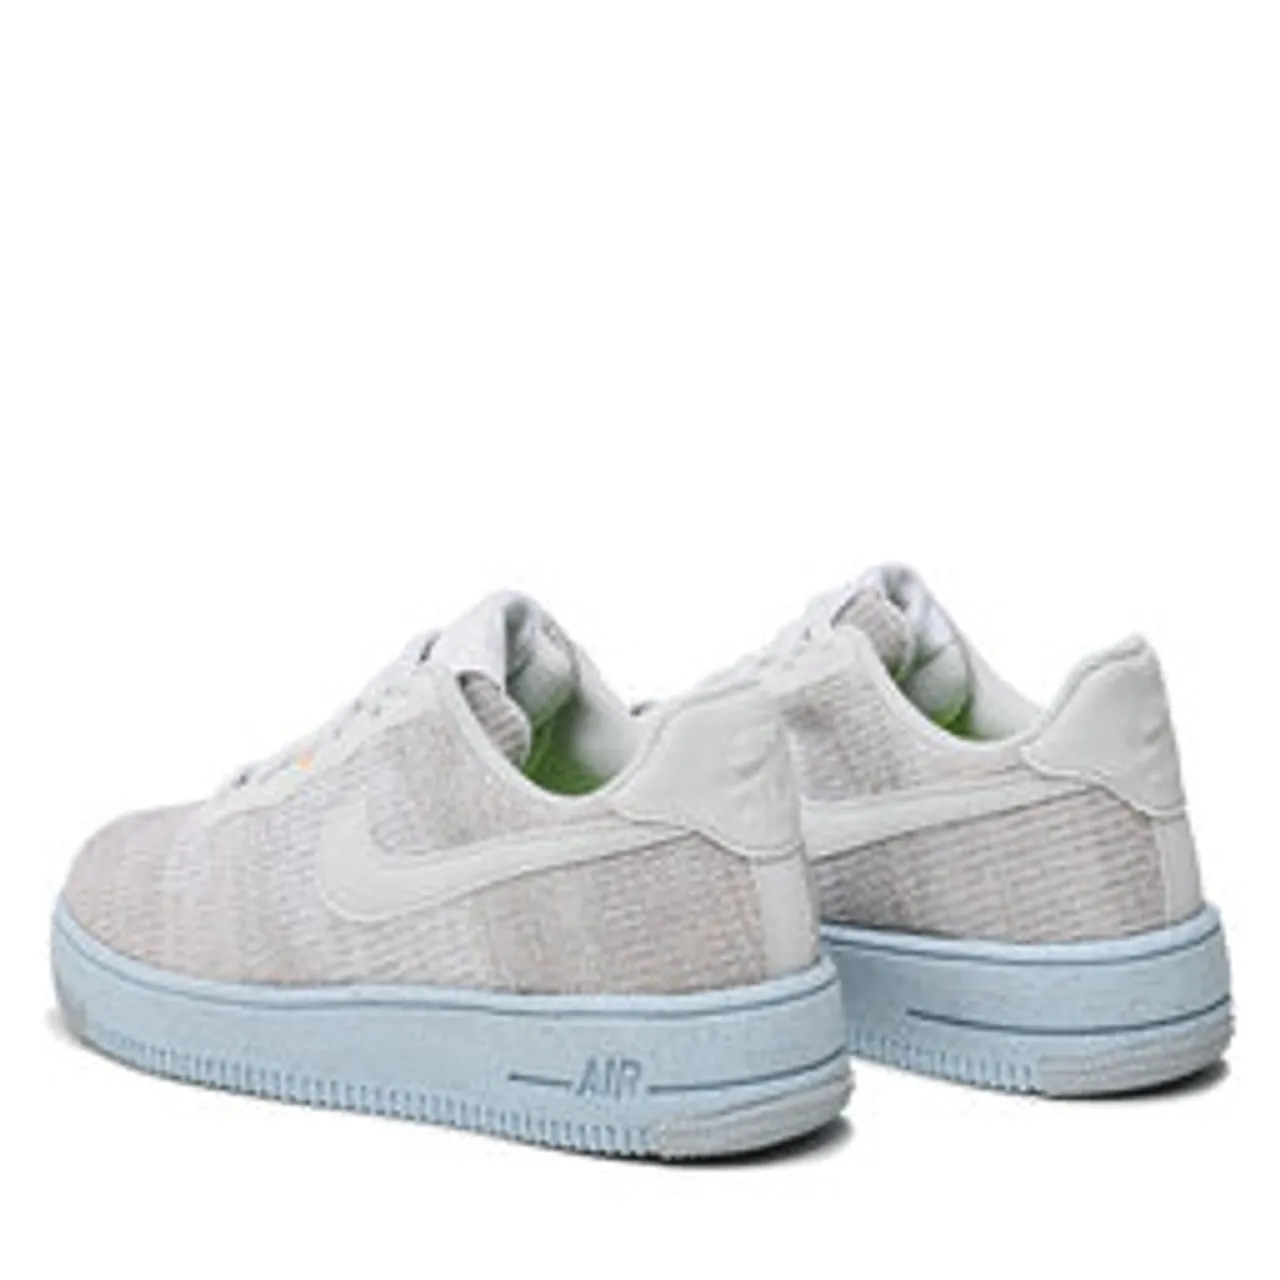 Schuhe Nike AF1 Crater Flyknit (GS) DH3375 101 White/Photon Dust